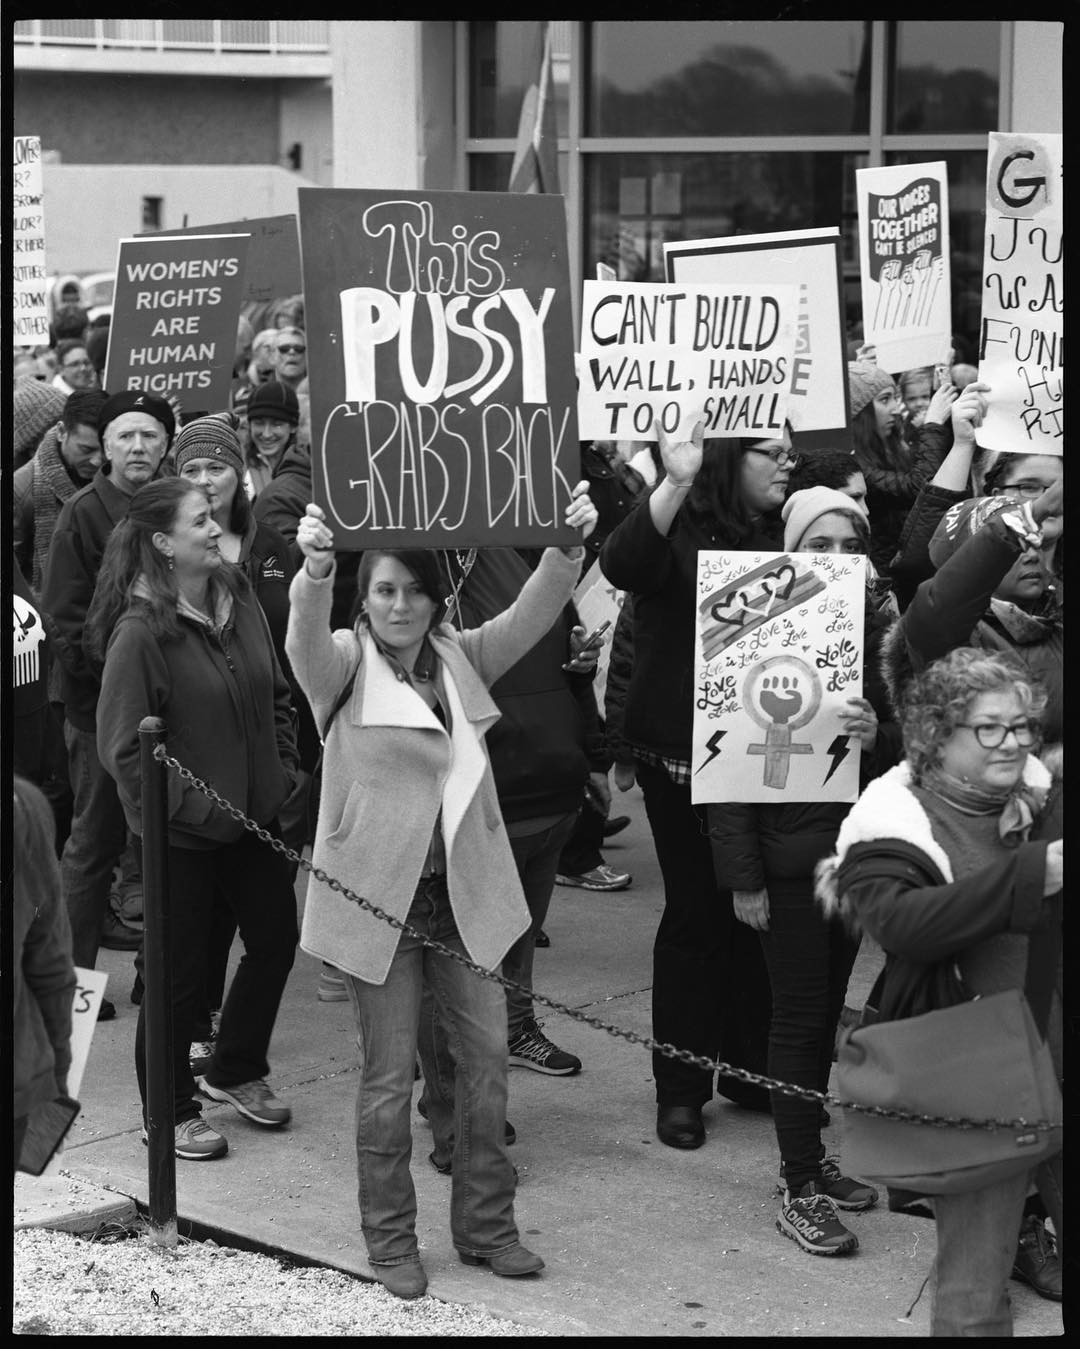 This Pussy Grabs Back #womensmarch #womensmarchap #film #filmisnotdead #pentax67